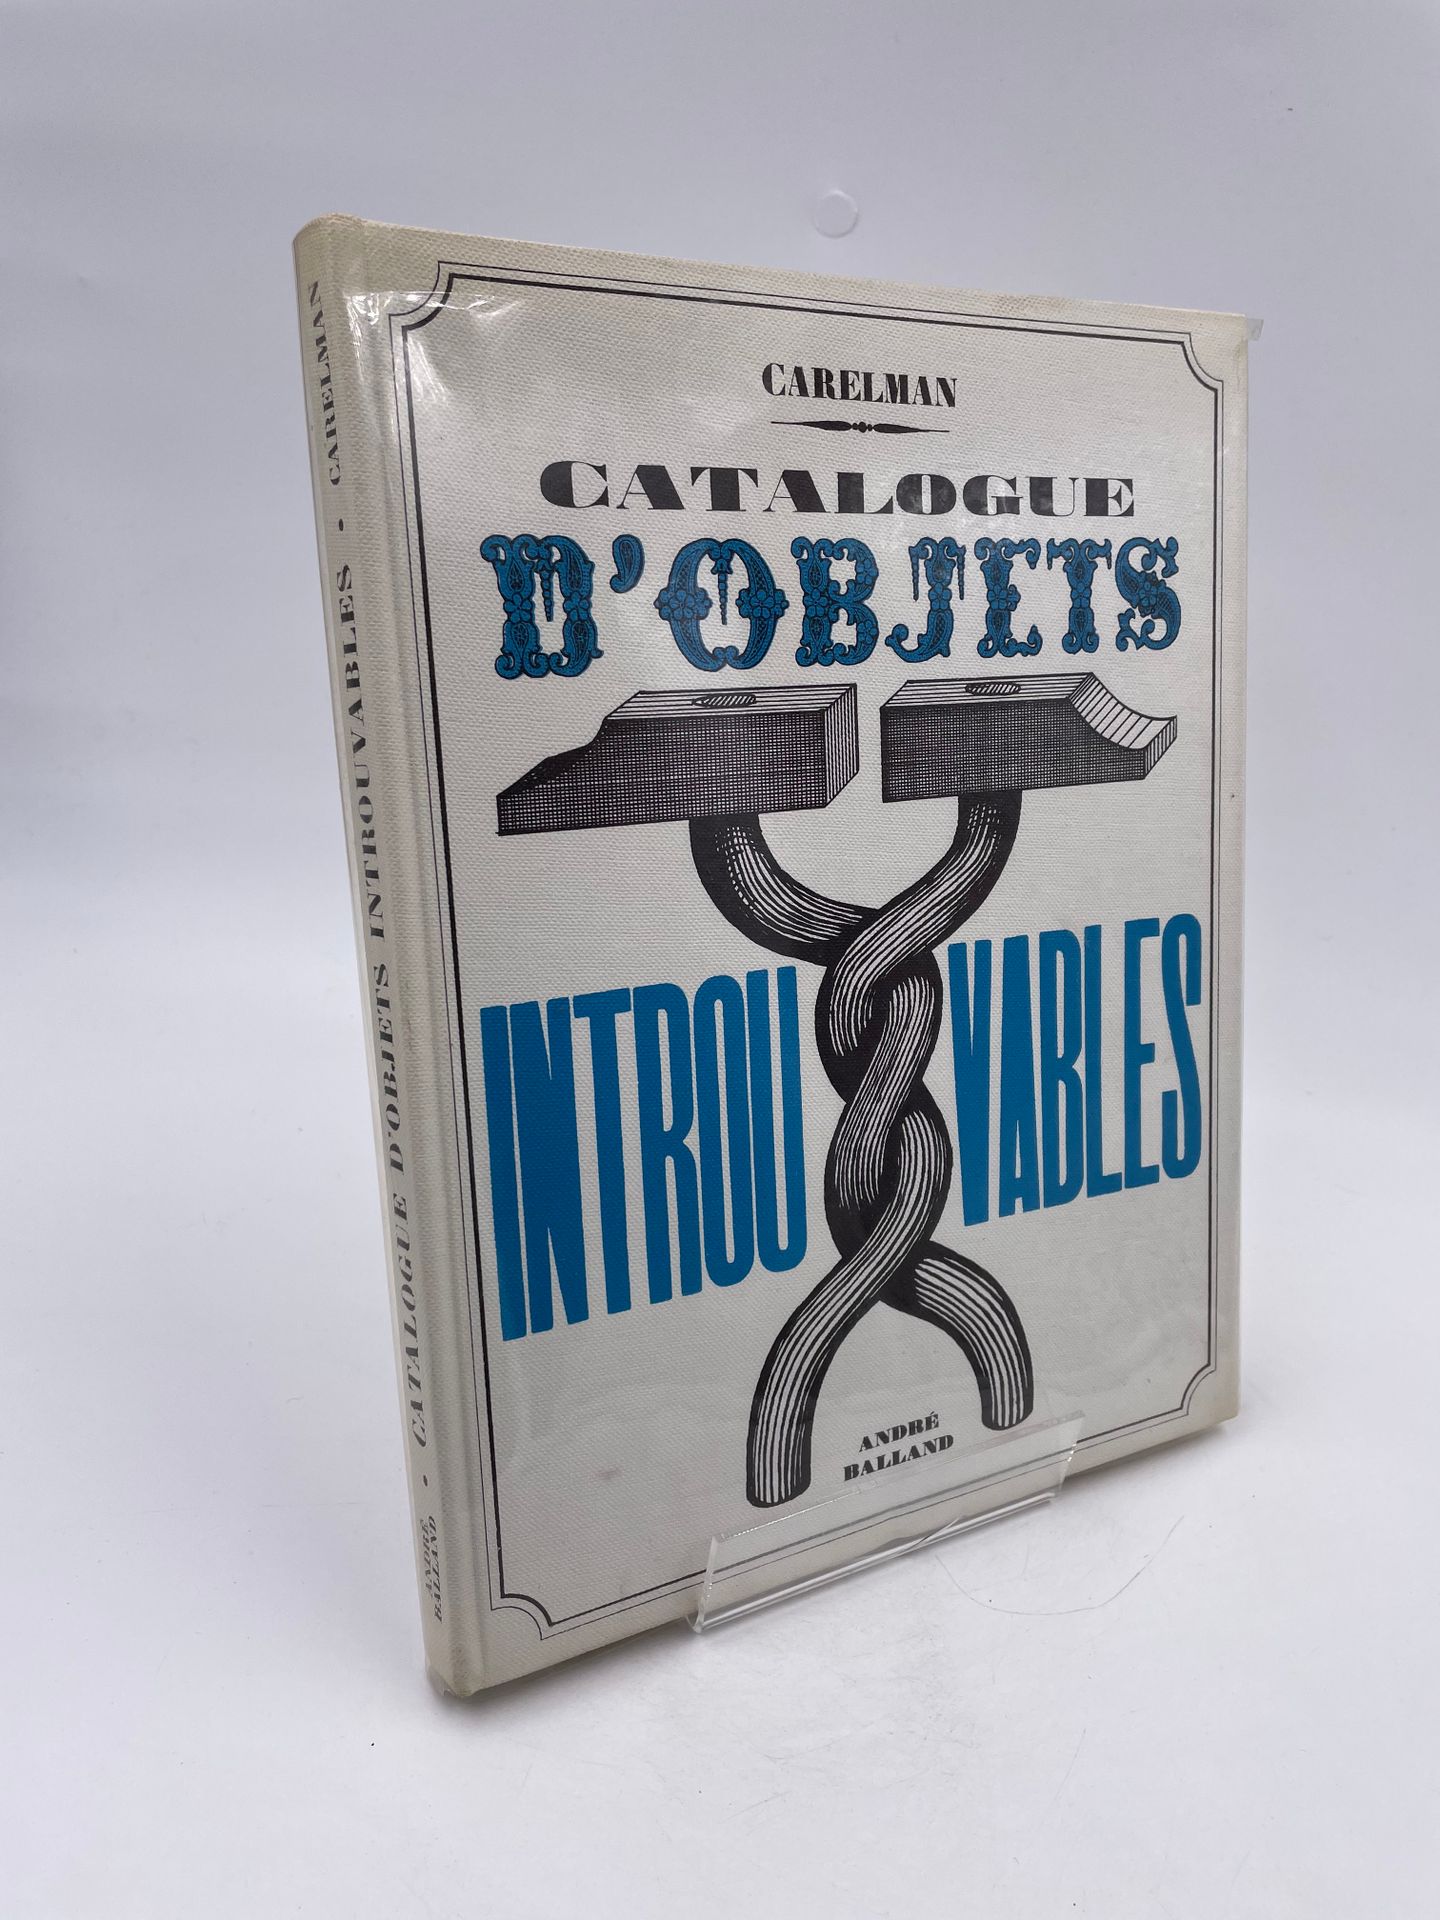 Null Book - Jacques Carelman

"Catalog d'Objets Introuvables", (And yet indispen&hellip;